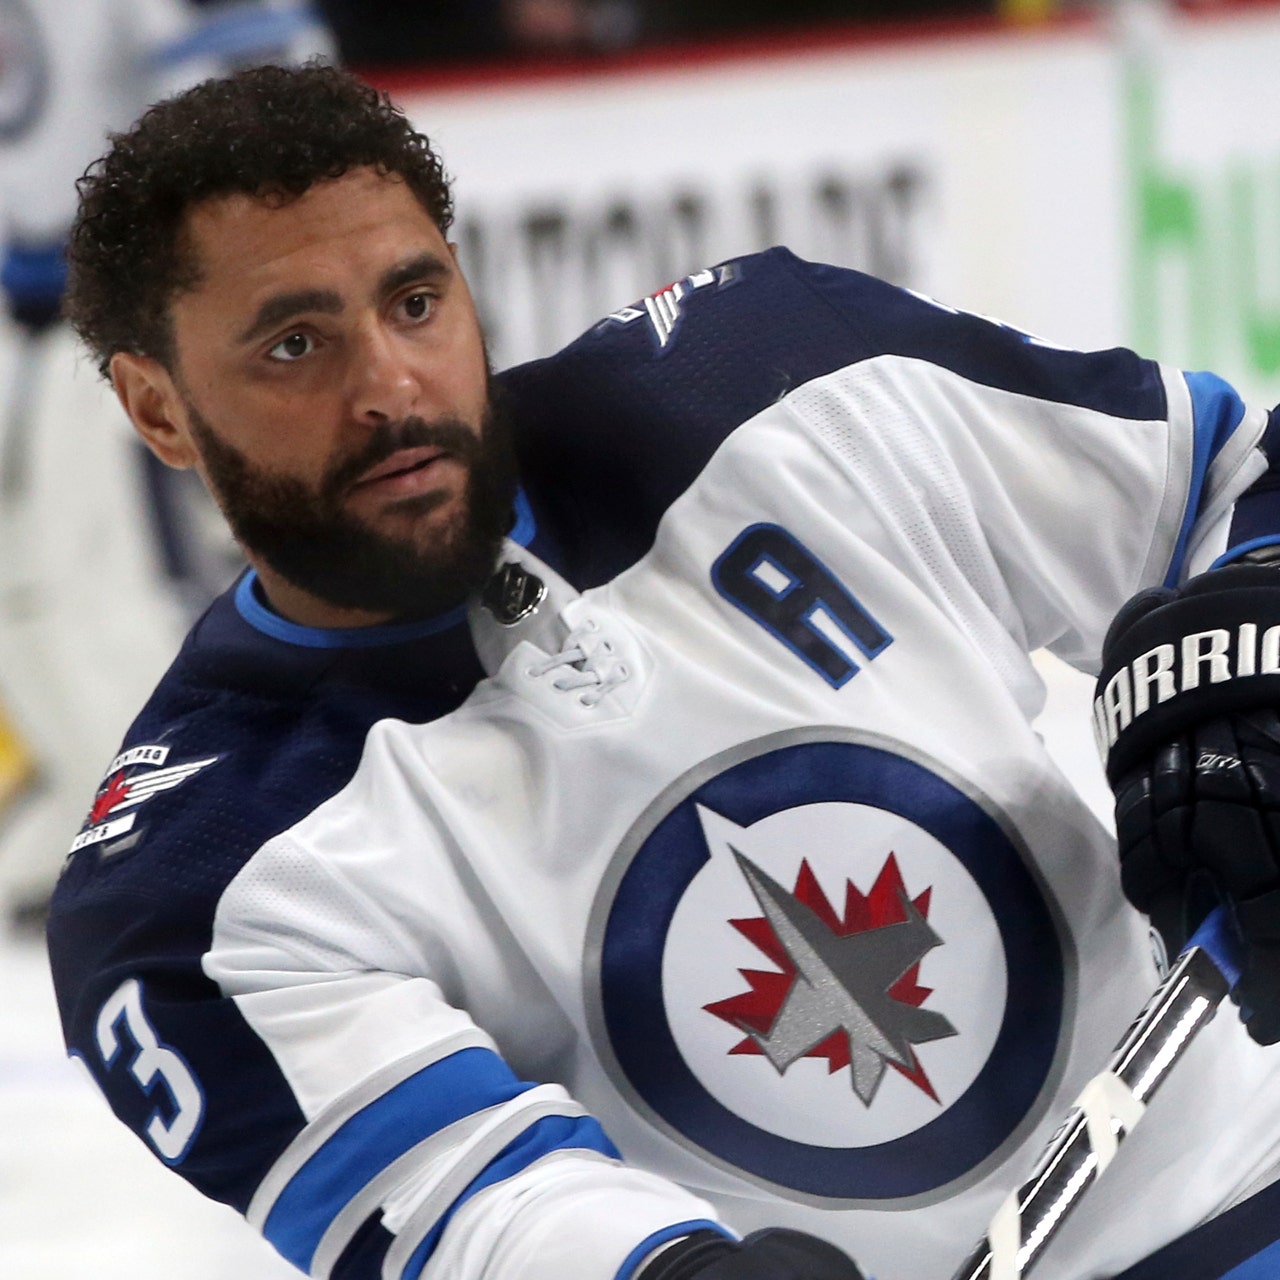 San Jose Sharks: Why Dustin Byfuglien Could Be the Answer